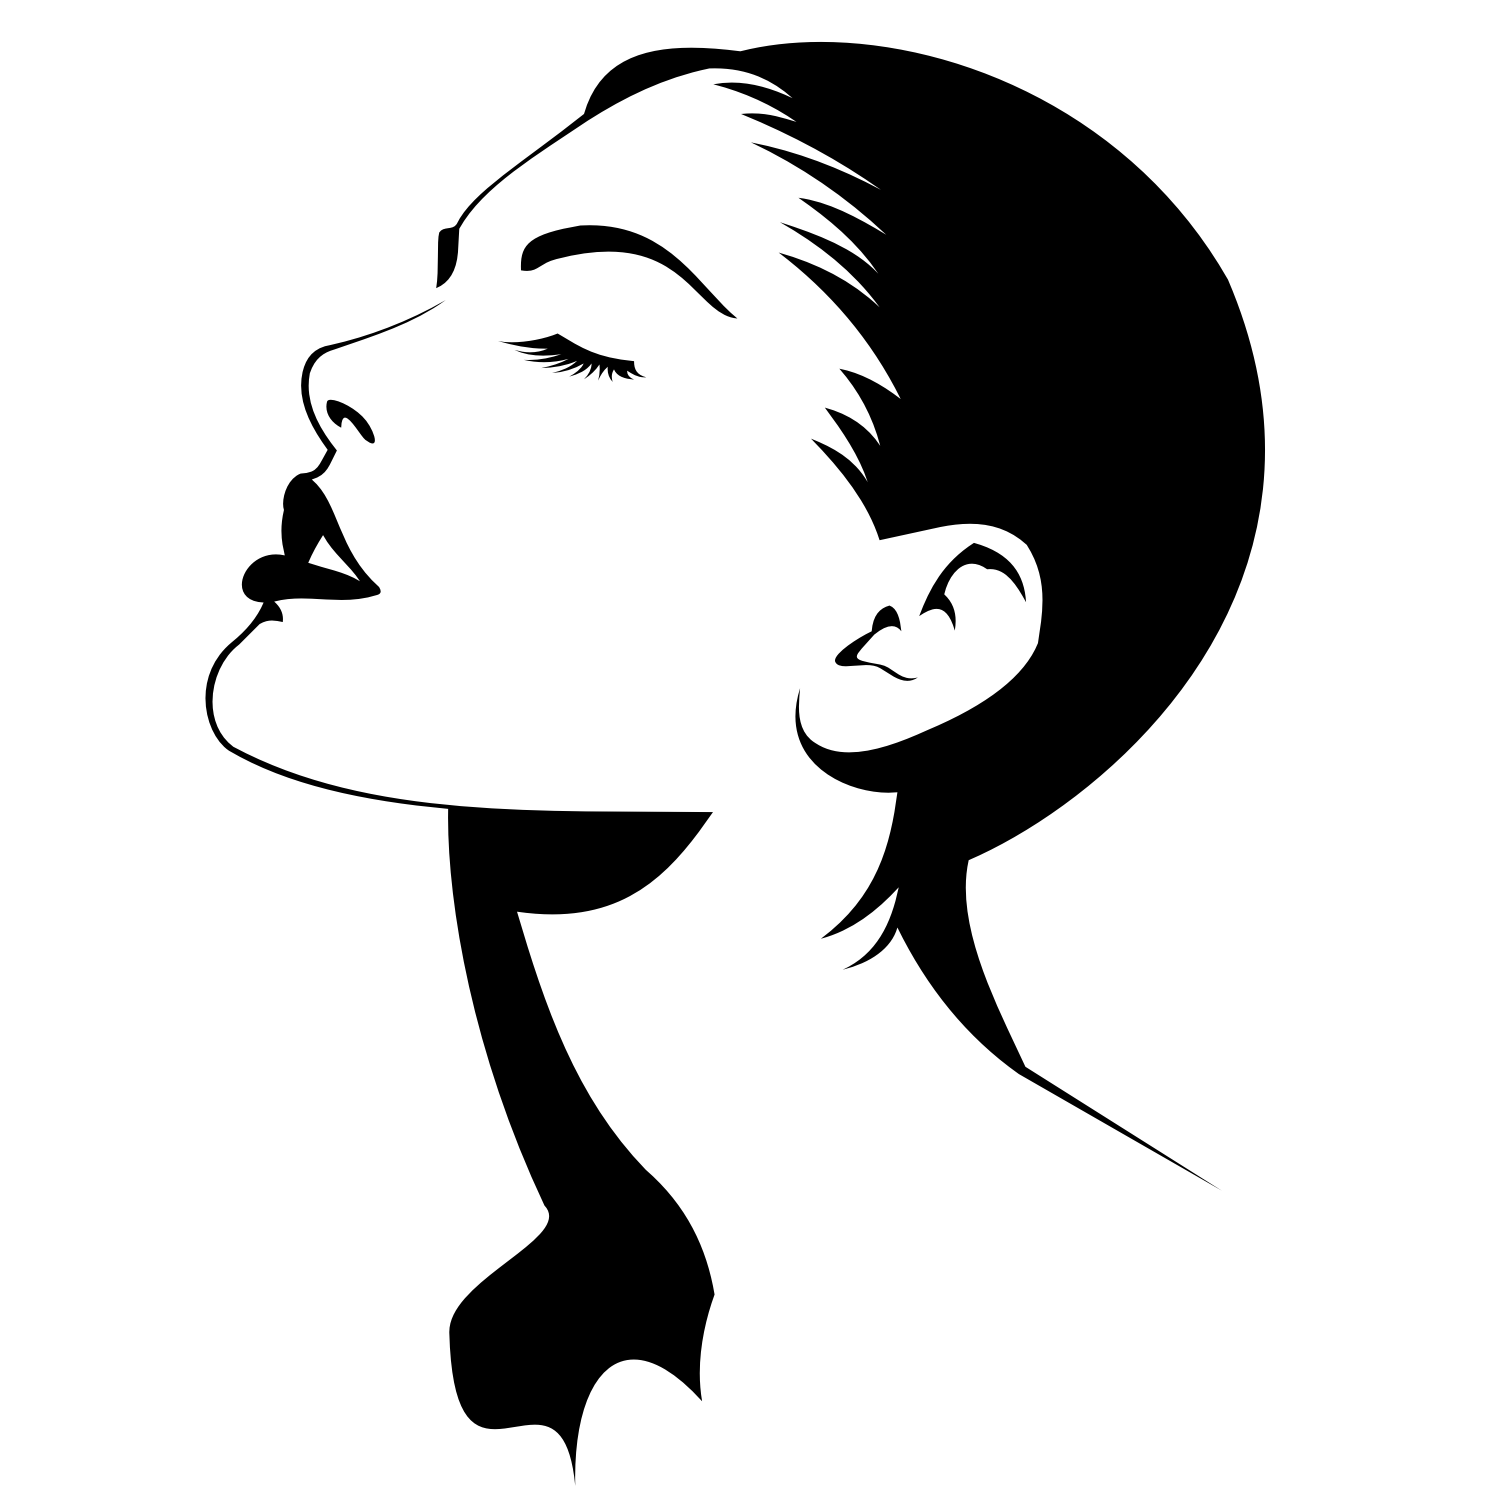 free vector clipart woman - photo #23